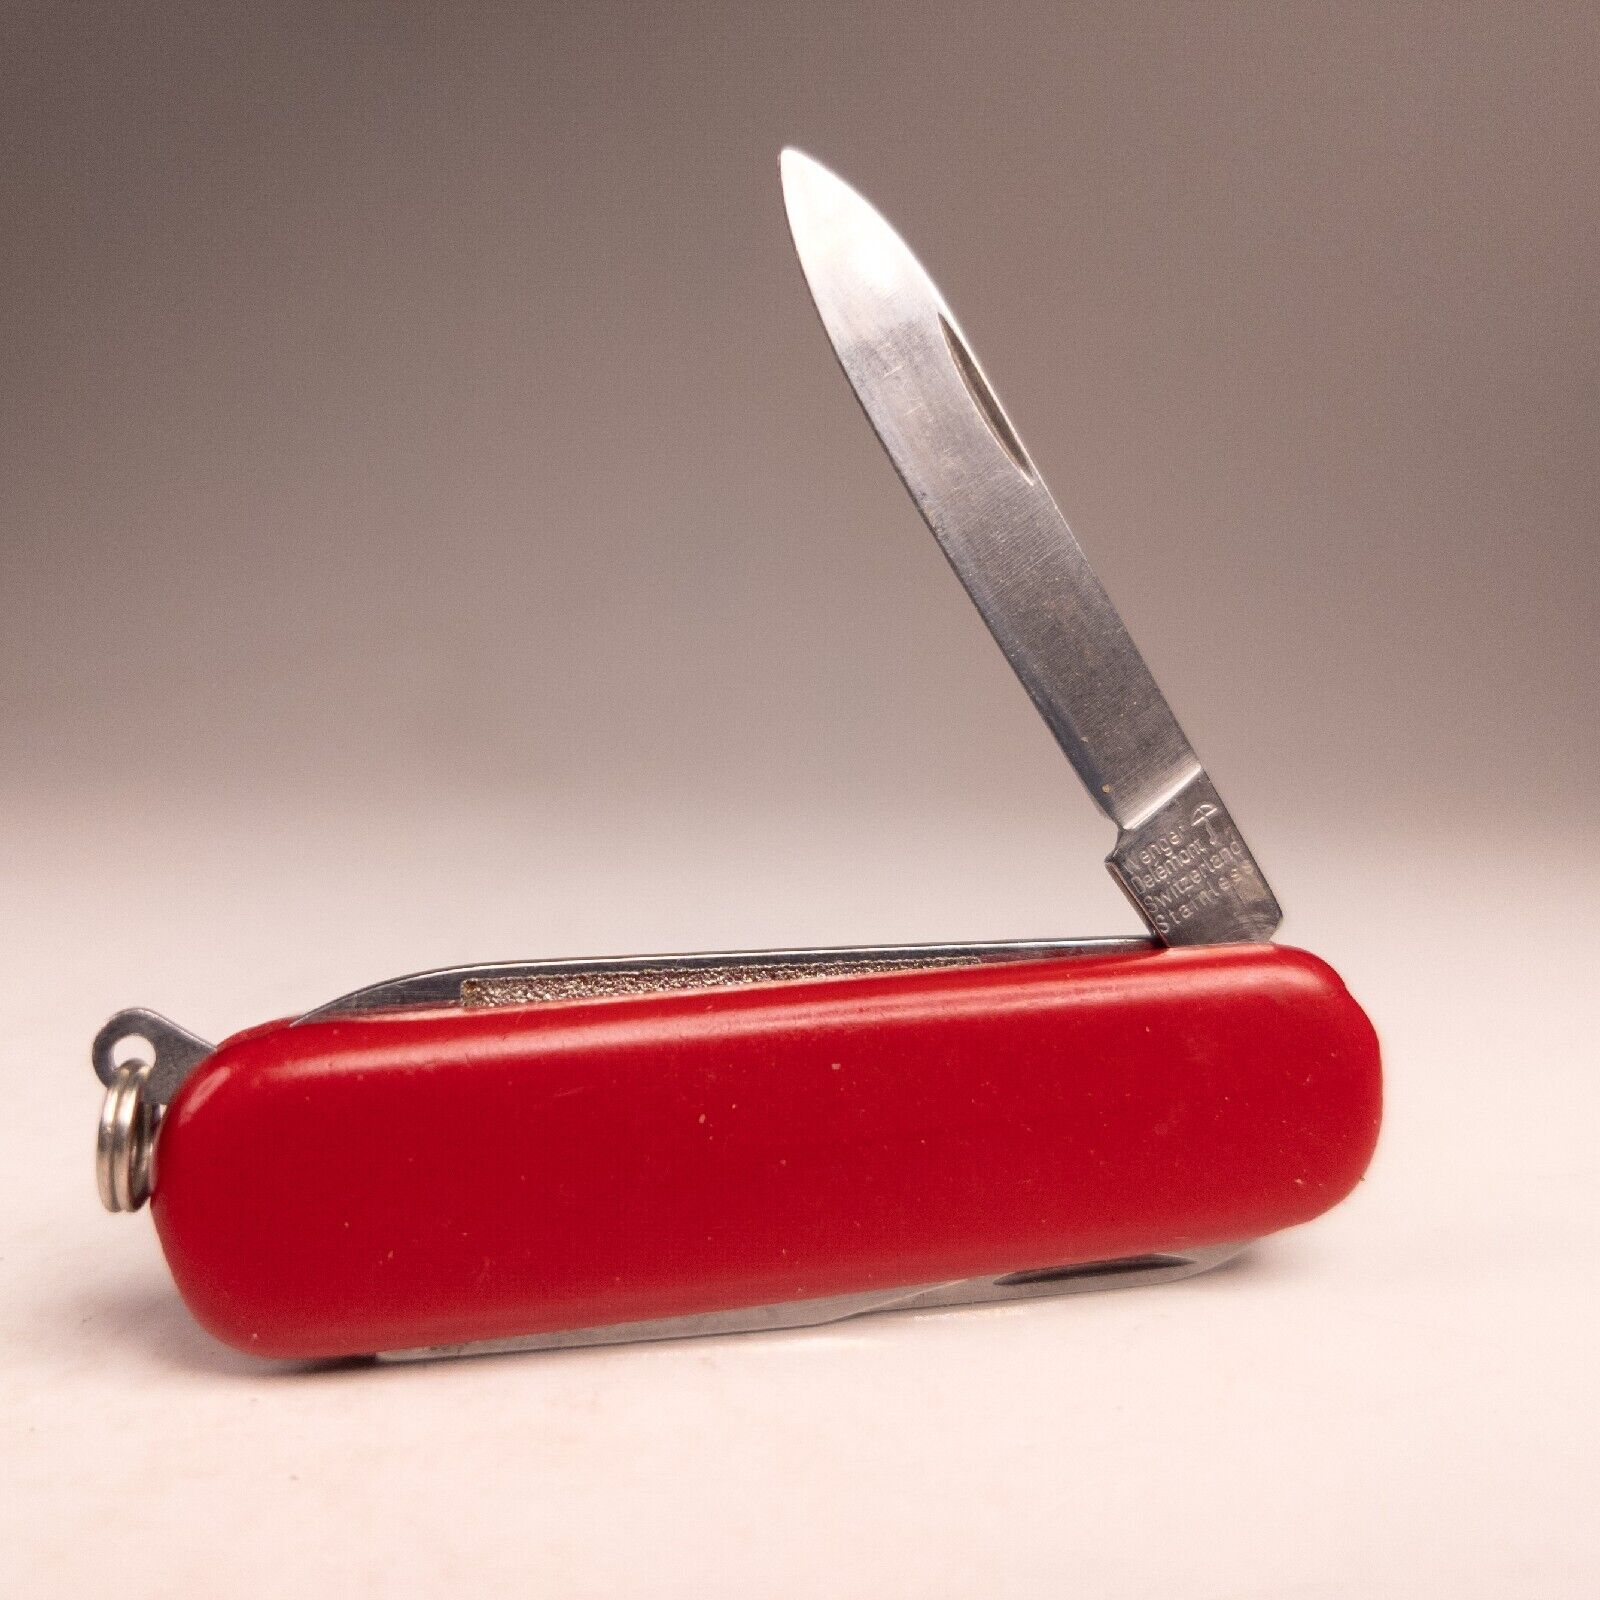 Wenger Esquire 65mm  Swiss Army Knife - Red - Retired *See Description*